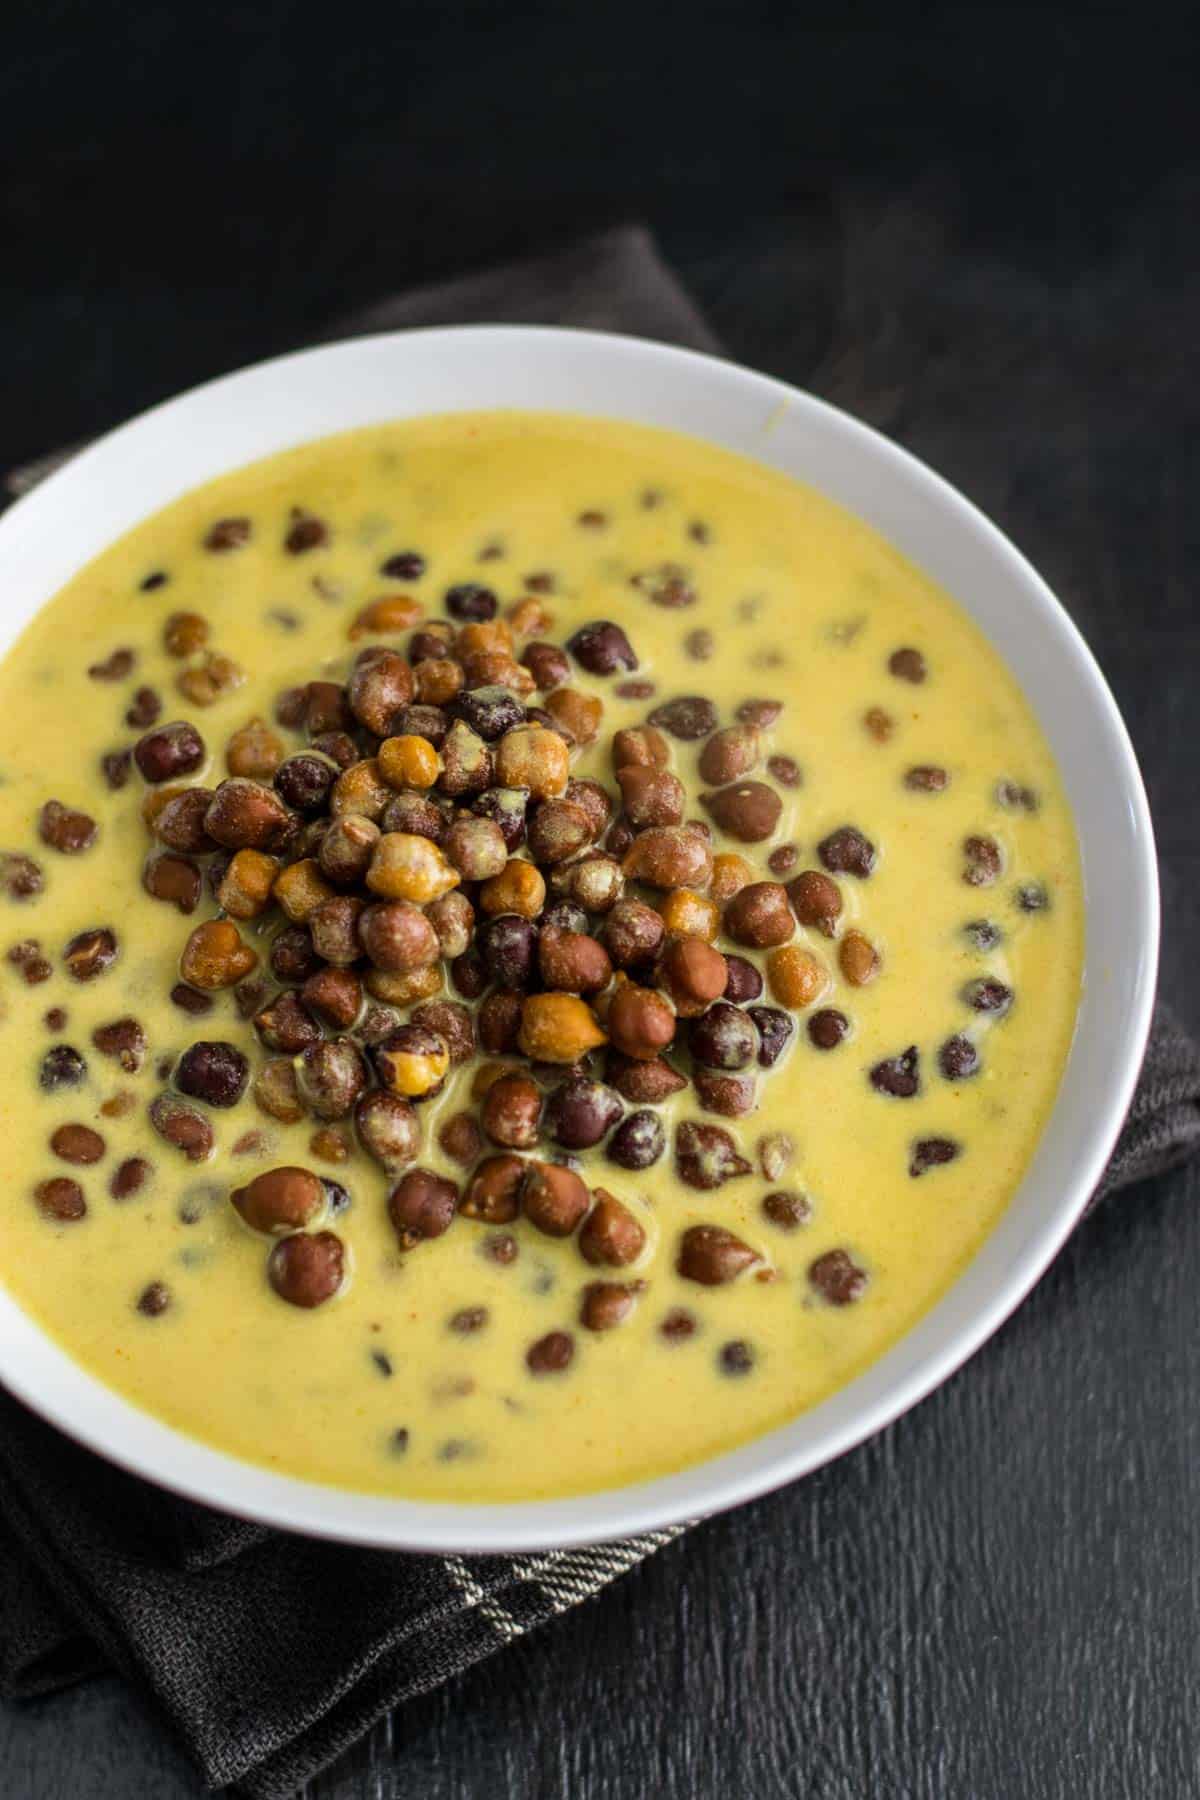 If you are looking for a gravy recipe that you can make in less than 30 minutes then this recipe for Black chickpeas in a yogurt gravy (Kaale Channe Ki Kadhi) will be perfect f